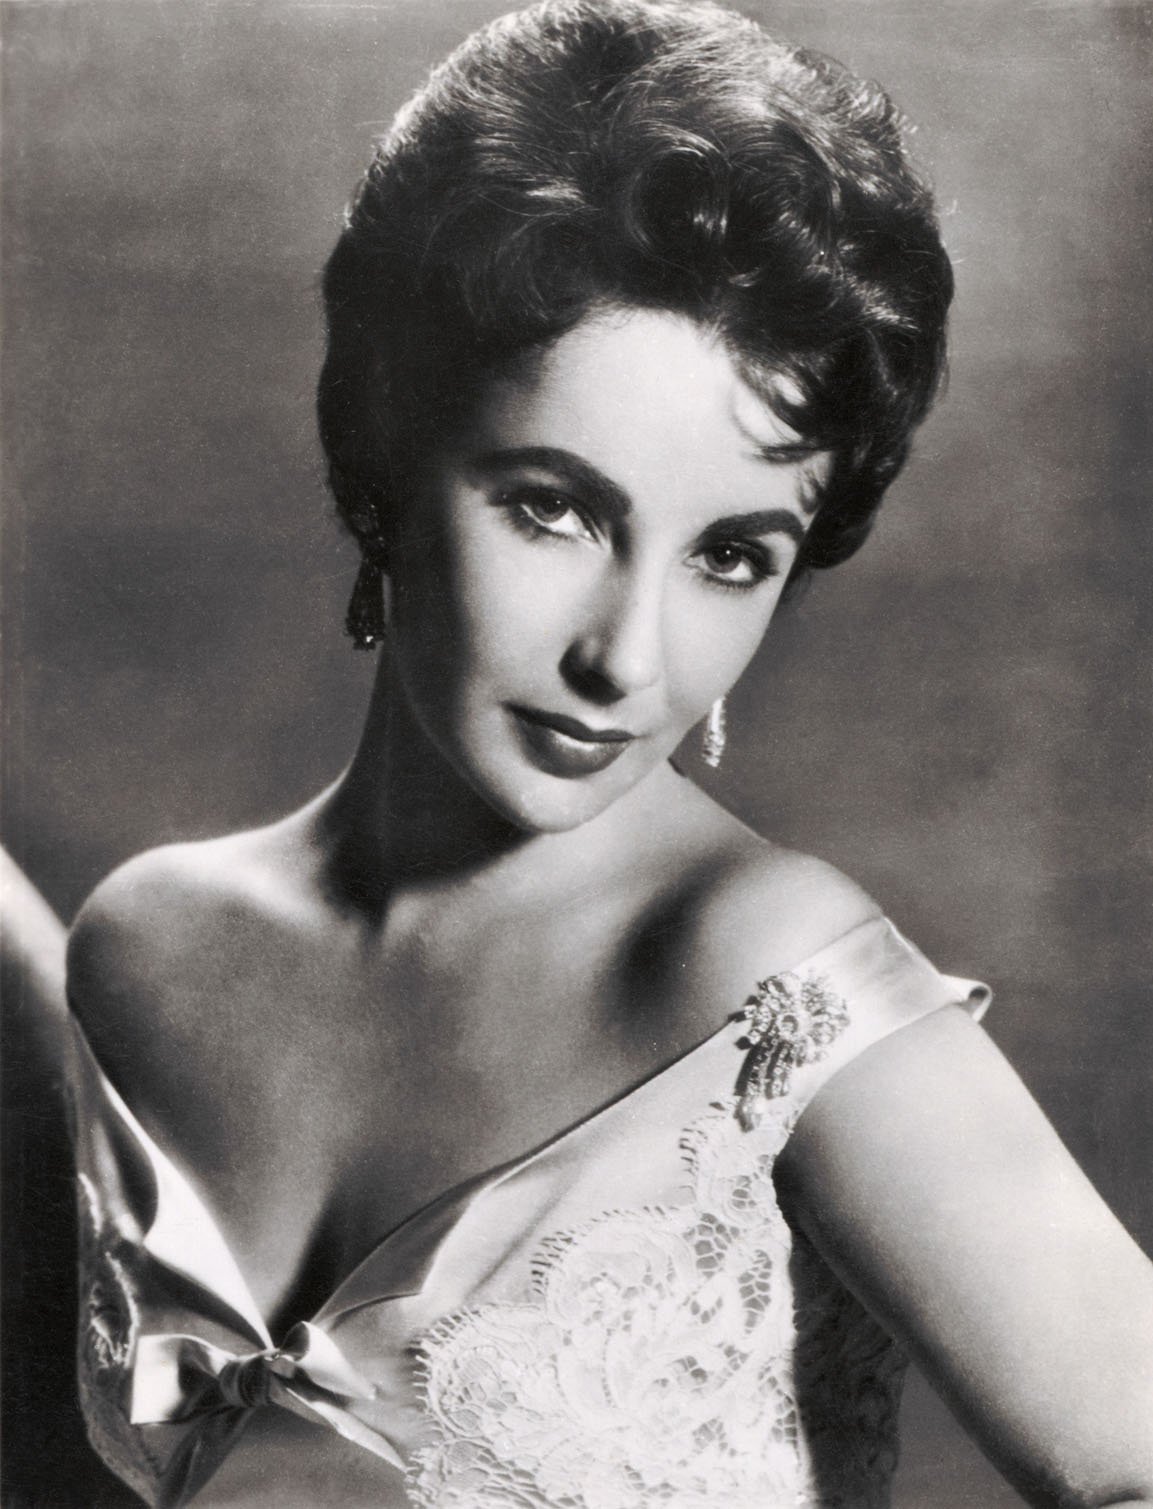 A portrait picture of Elizabeth Taylor during her early years as an actress. | Source: Getty Images.